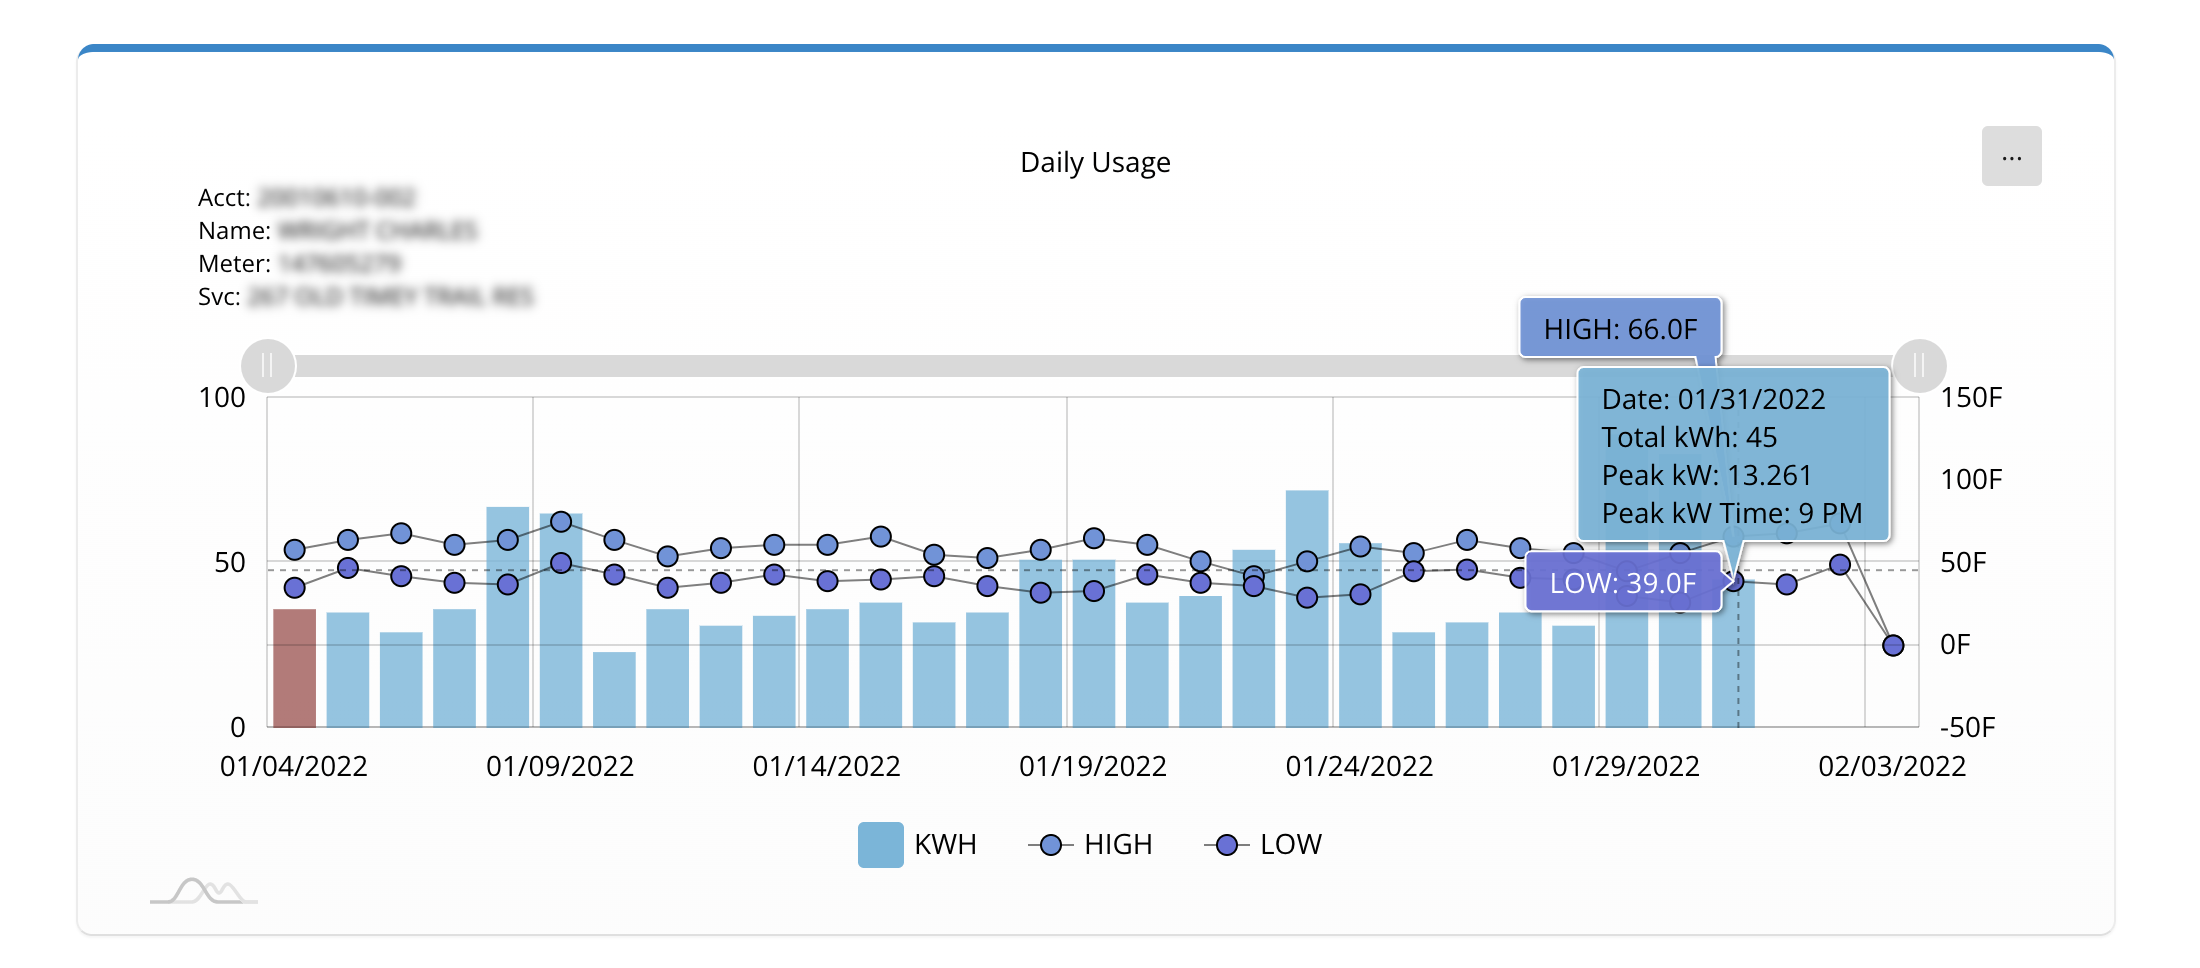 Step 4: Hover mouse over chart to view each day’s usage information